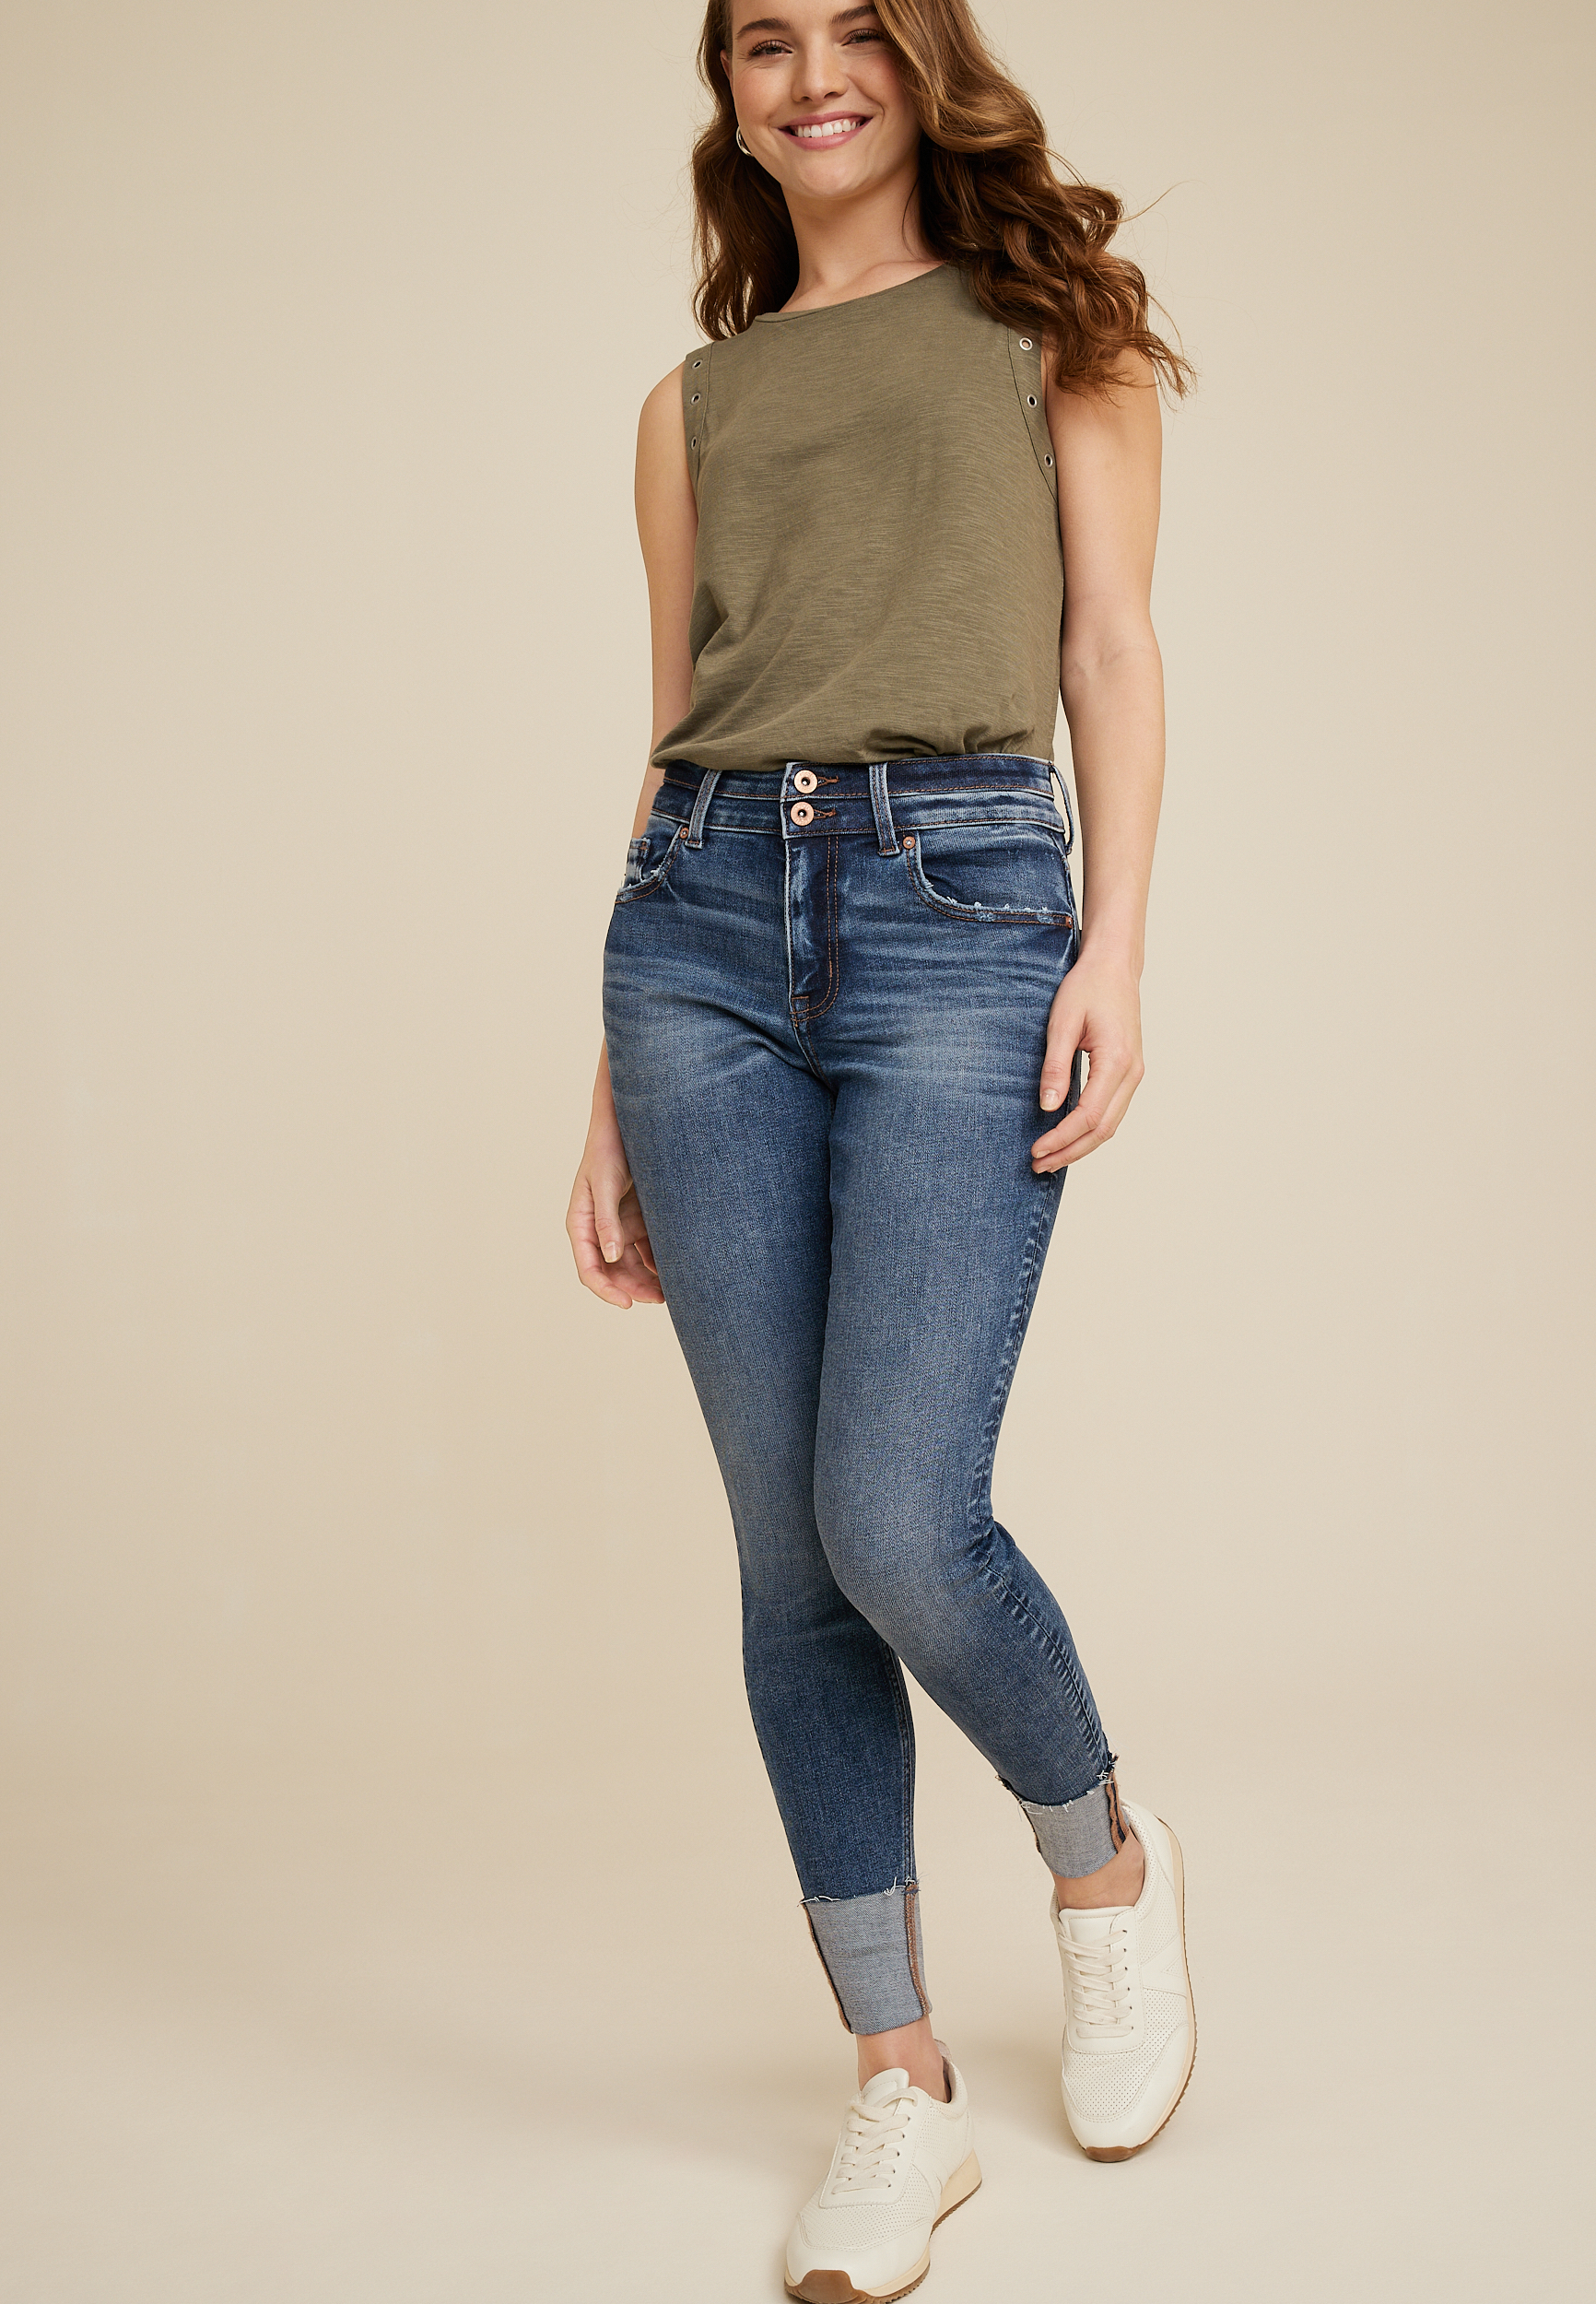 Edgely™ Jeans, Shop Edgy Jeans For Women